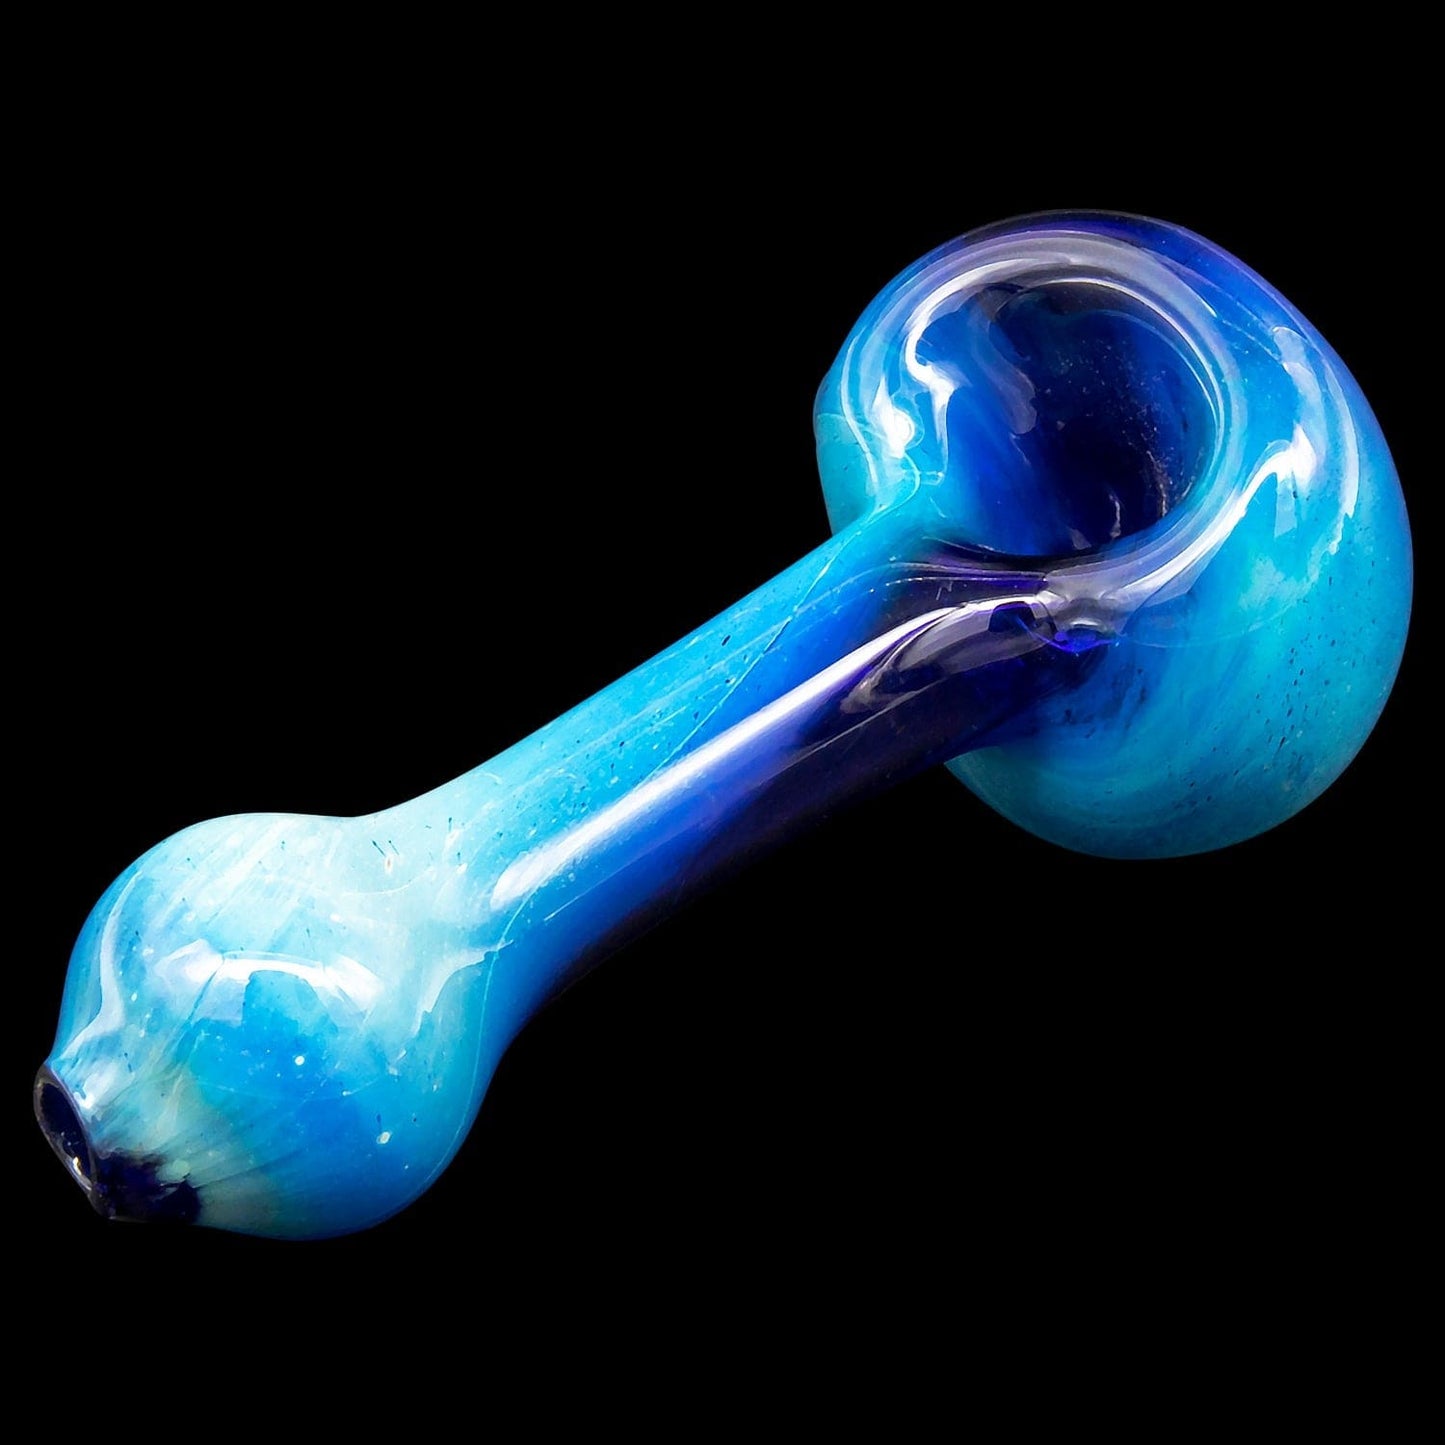 LA Pipes Hand Pipe Small "Galaxy" Fumed Spoon Pipe